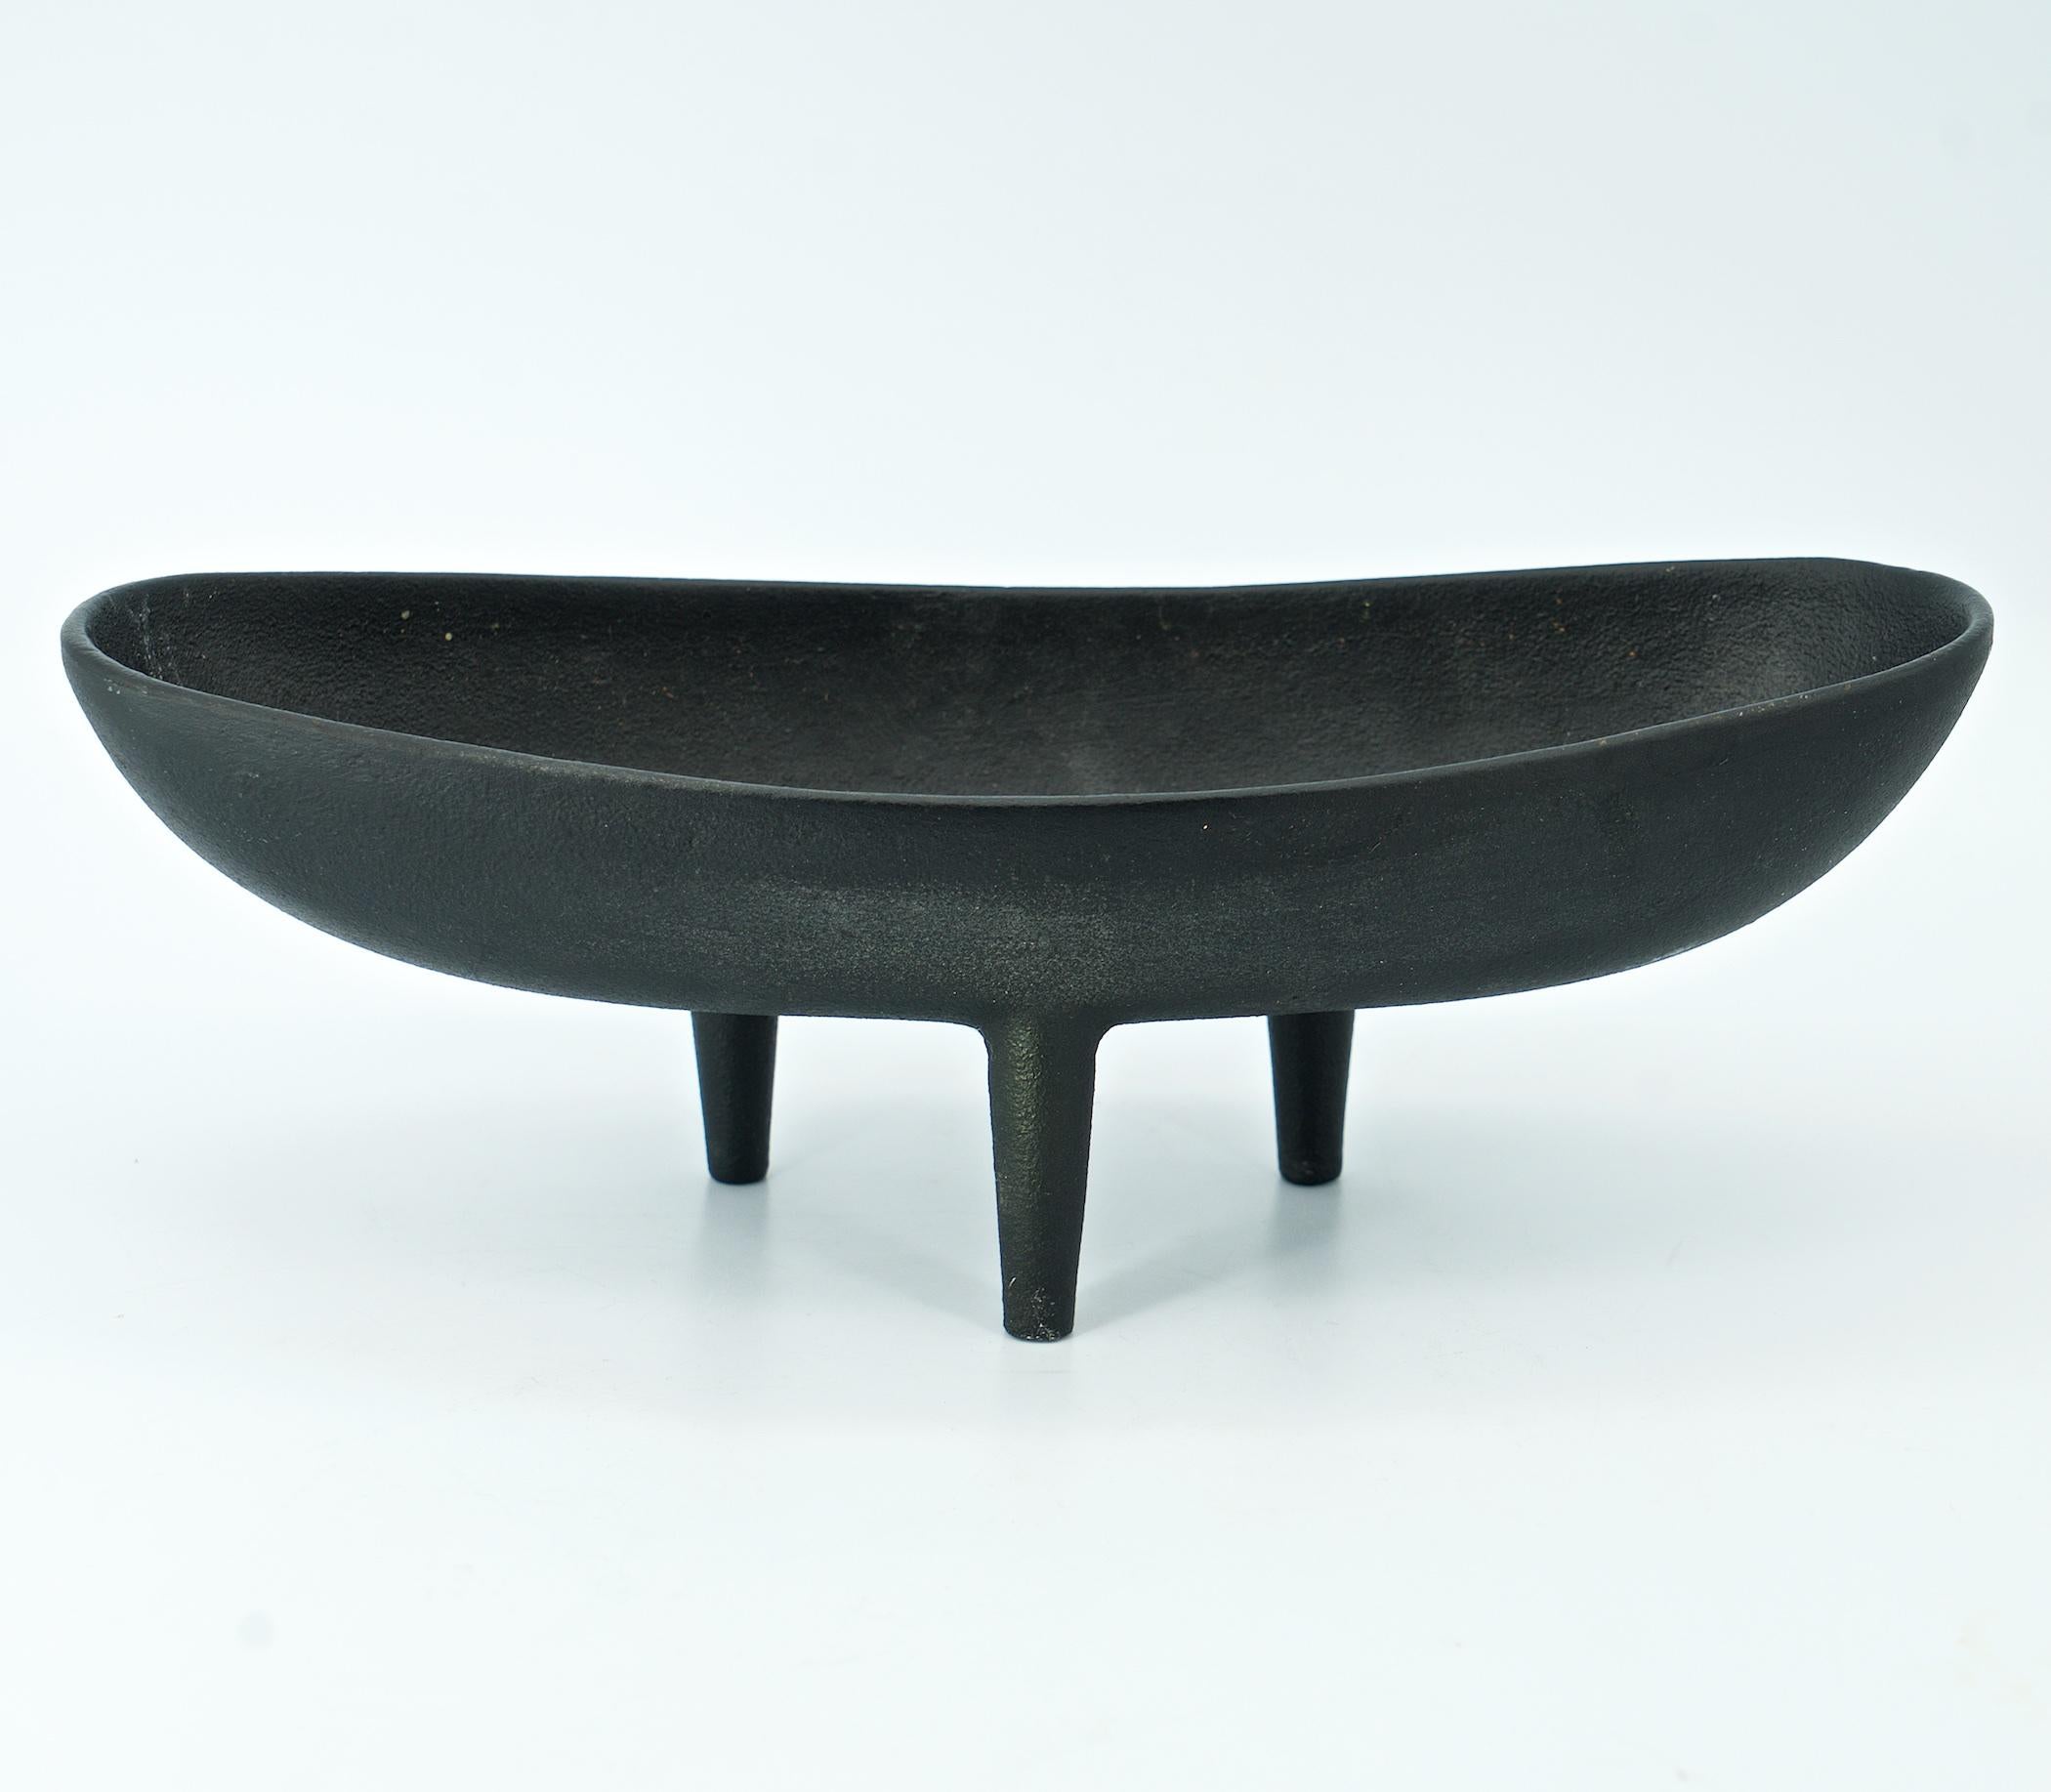 Attributed to the Unsung Castings Company of Japan, c.1950. A blackened cast steel tripod footed Ikebana dish, in the manner of Isamu Noguchi. Some very light wear to the finish but no chips, and no cracks to the metal. Unmarked.